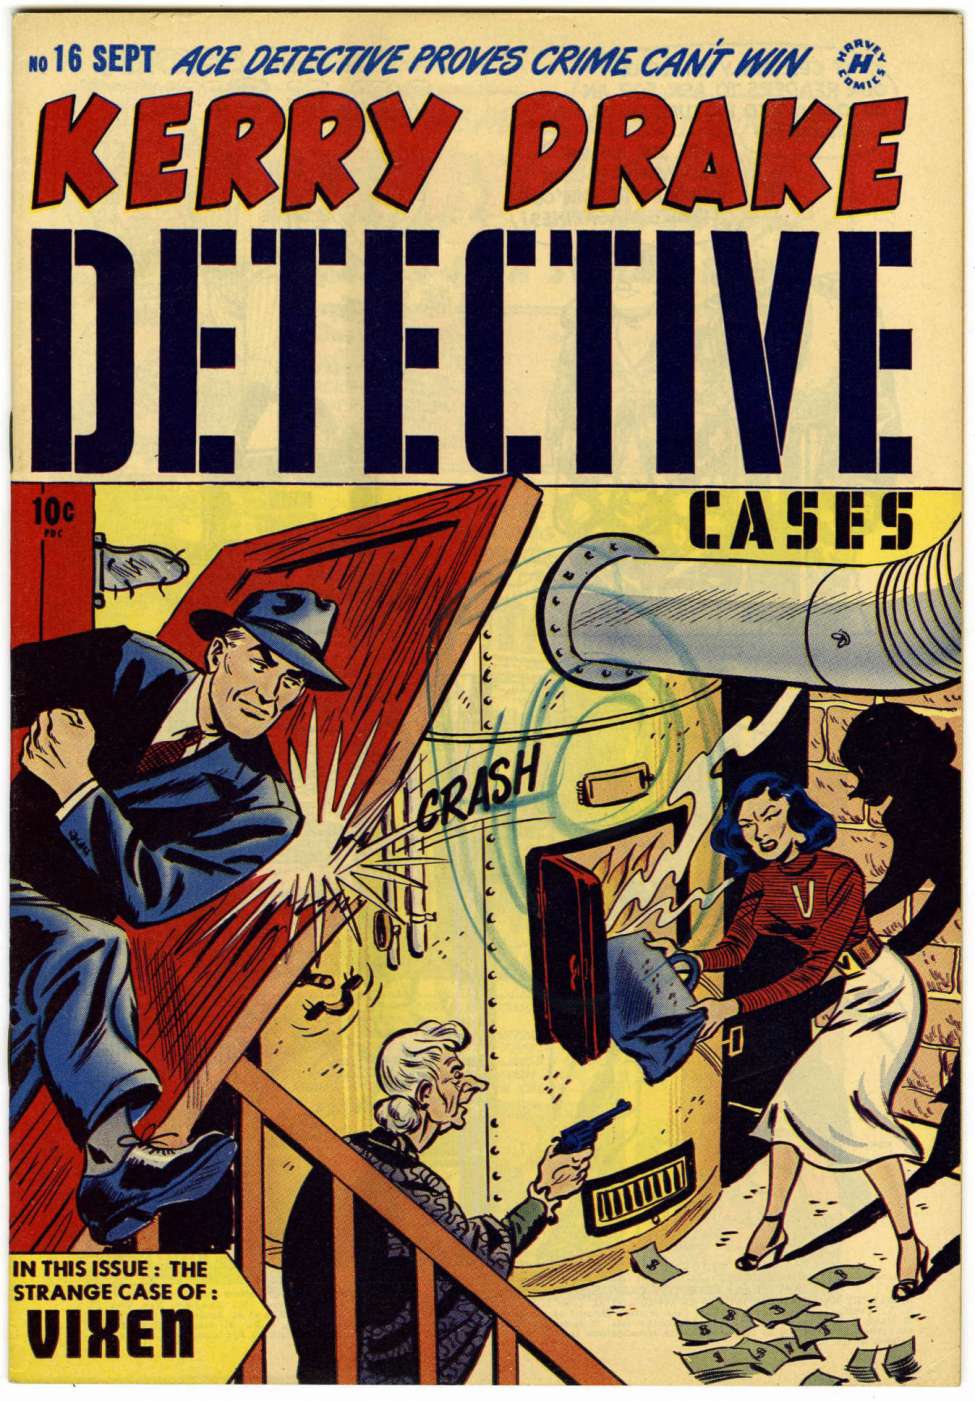 Book Cover For Kerry Drake Detective Cases 16